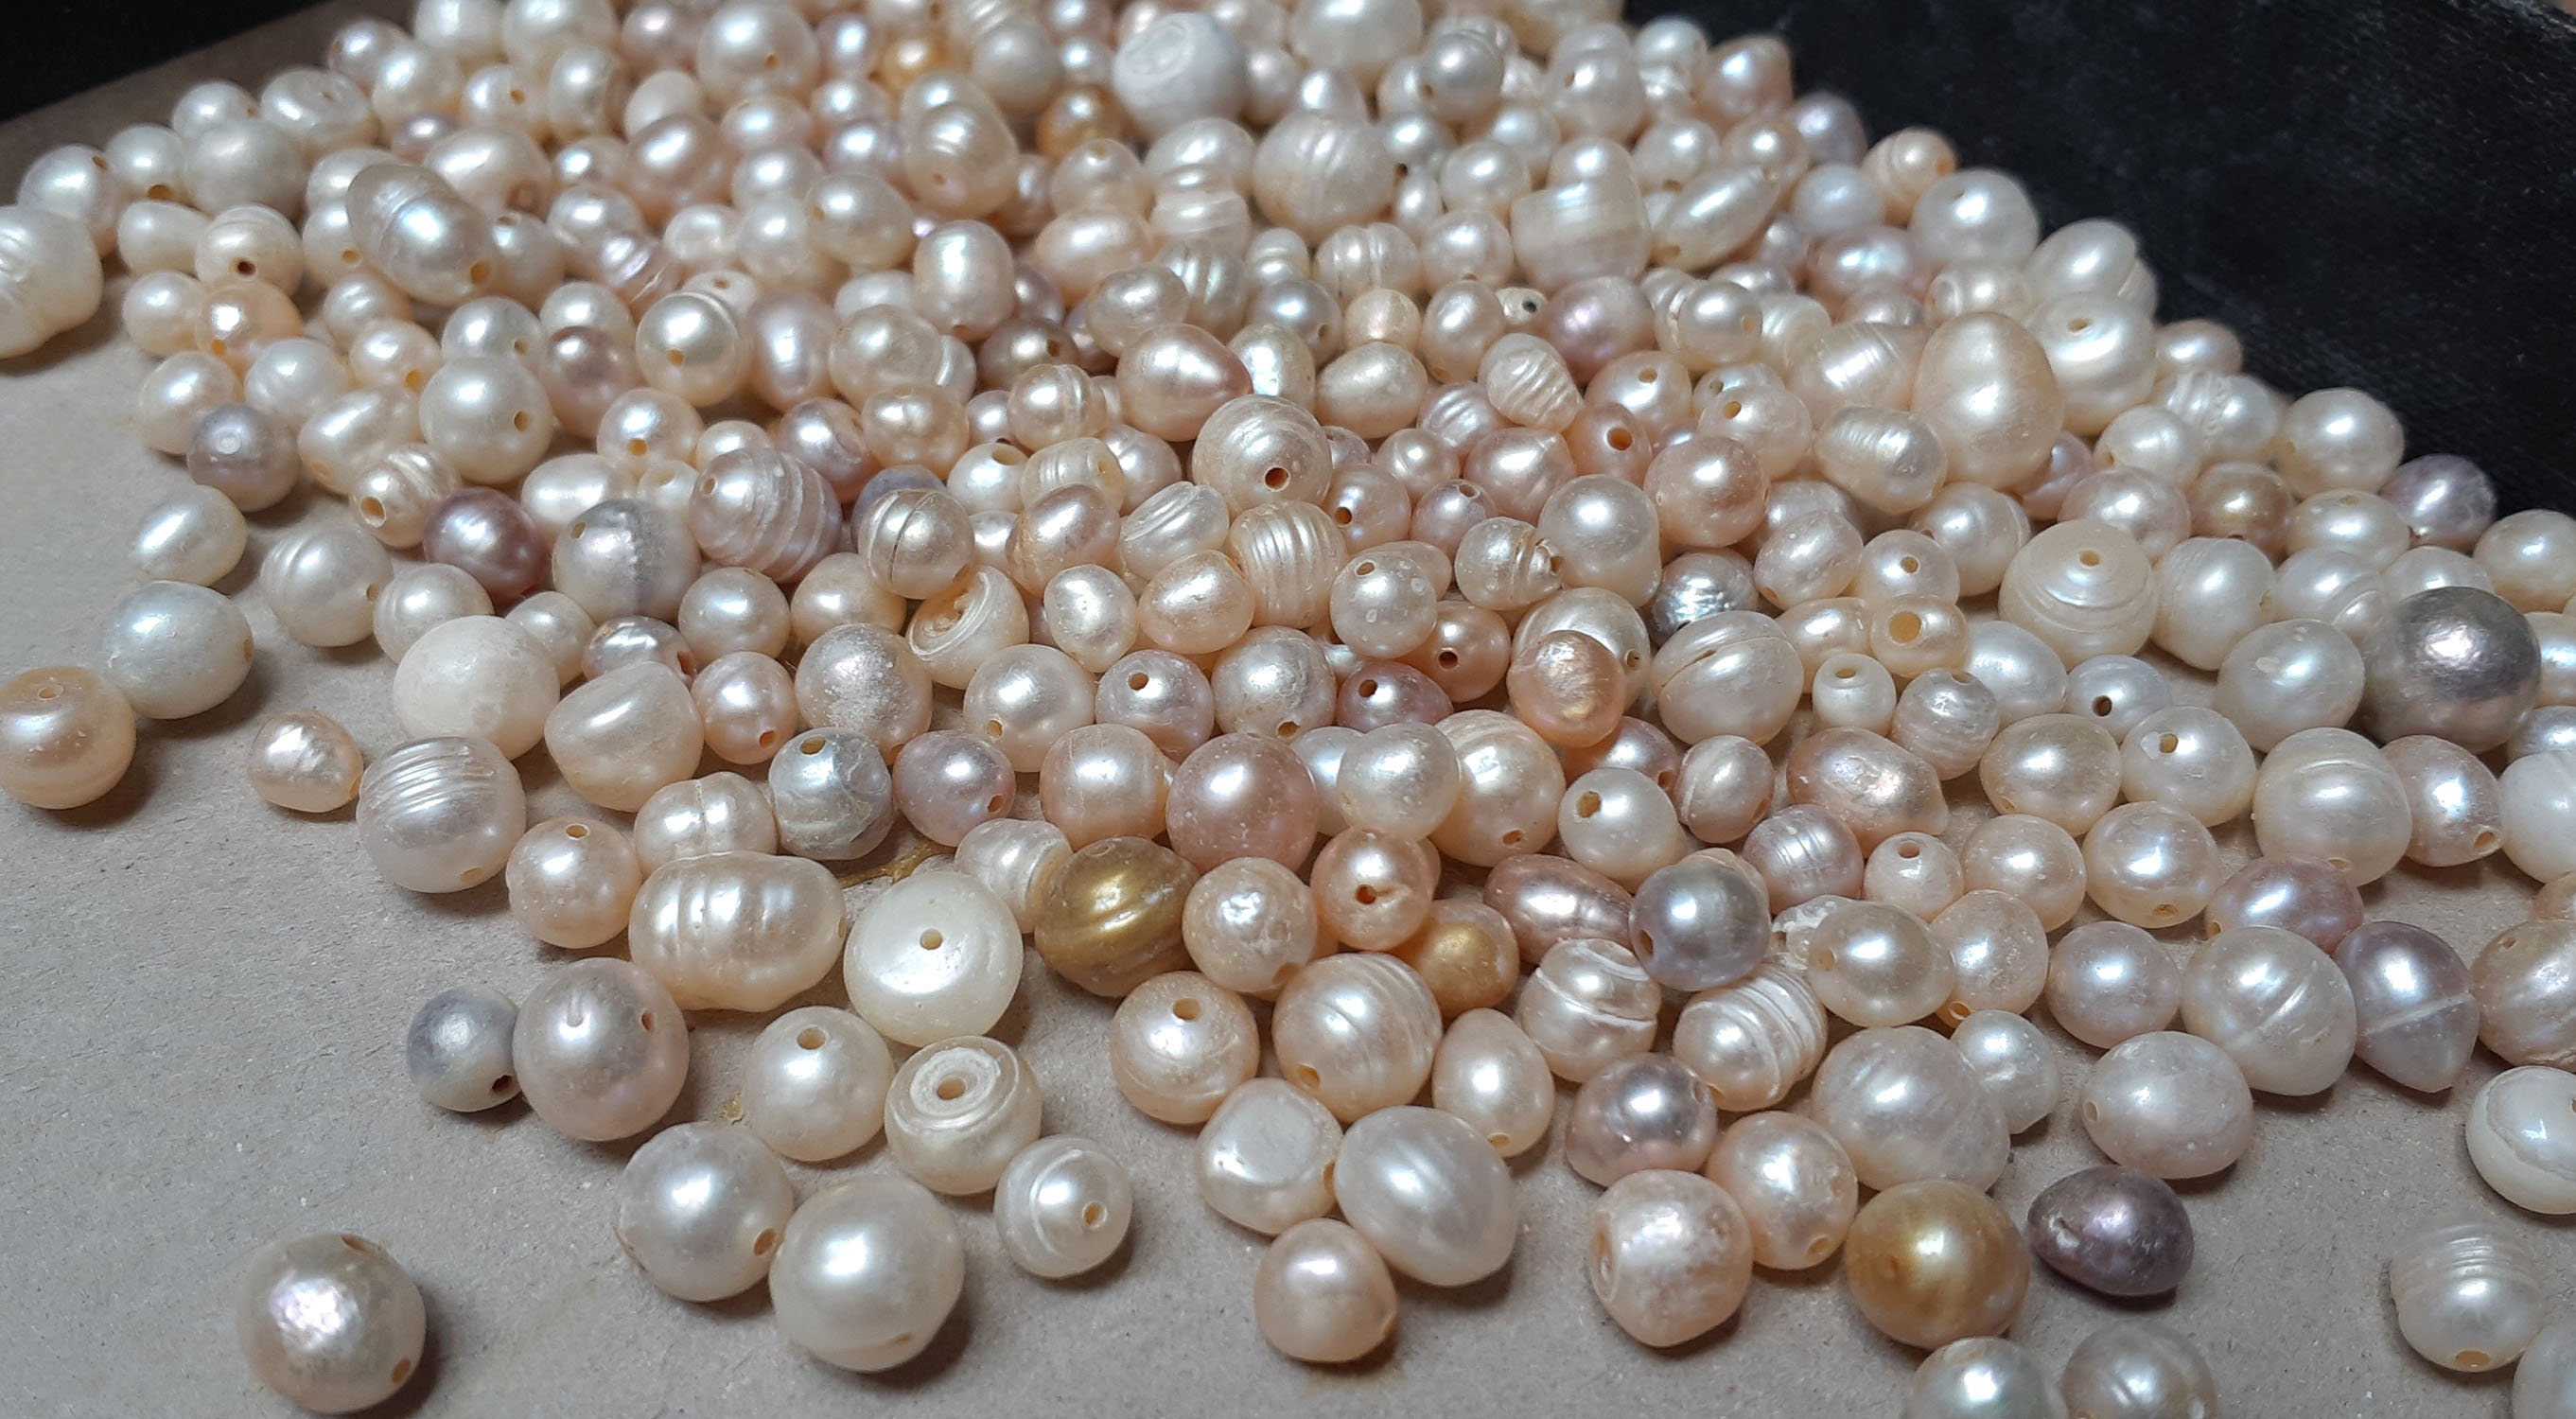 Real Natural Freshwater Pearl Beads Baroque Punch Oval Loose Beads for  Jewelry Making Bracelet Necklace Handmade Crafts Cultured Freshwater Pearl  Beads Cultured…